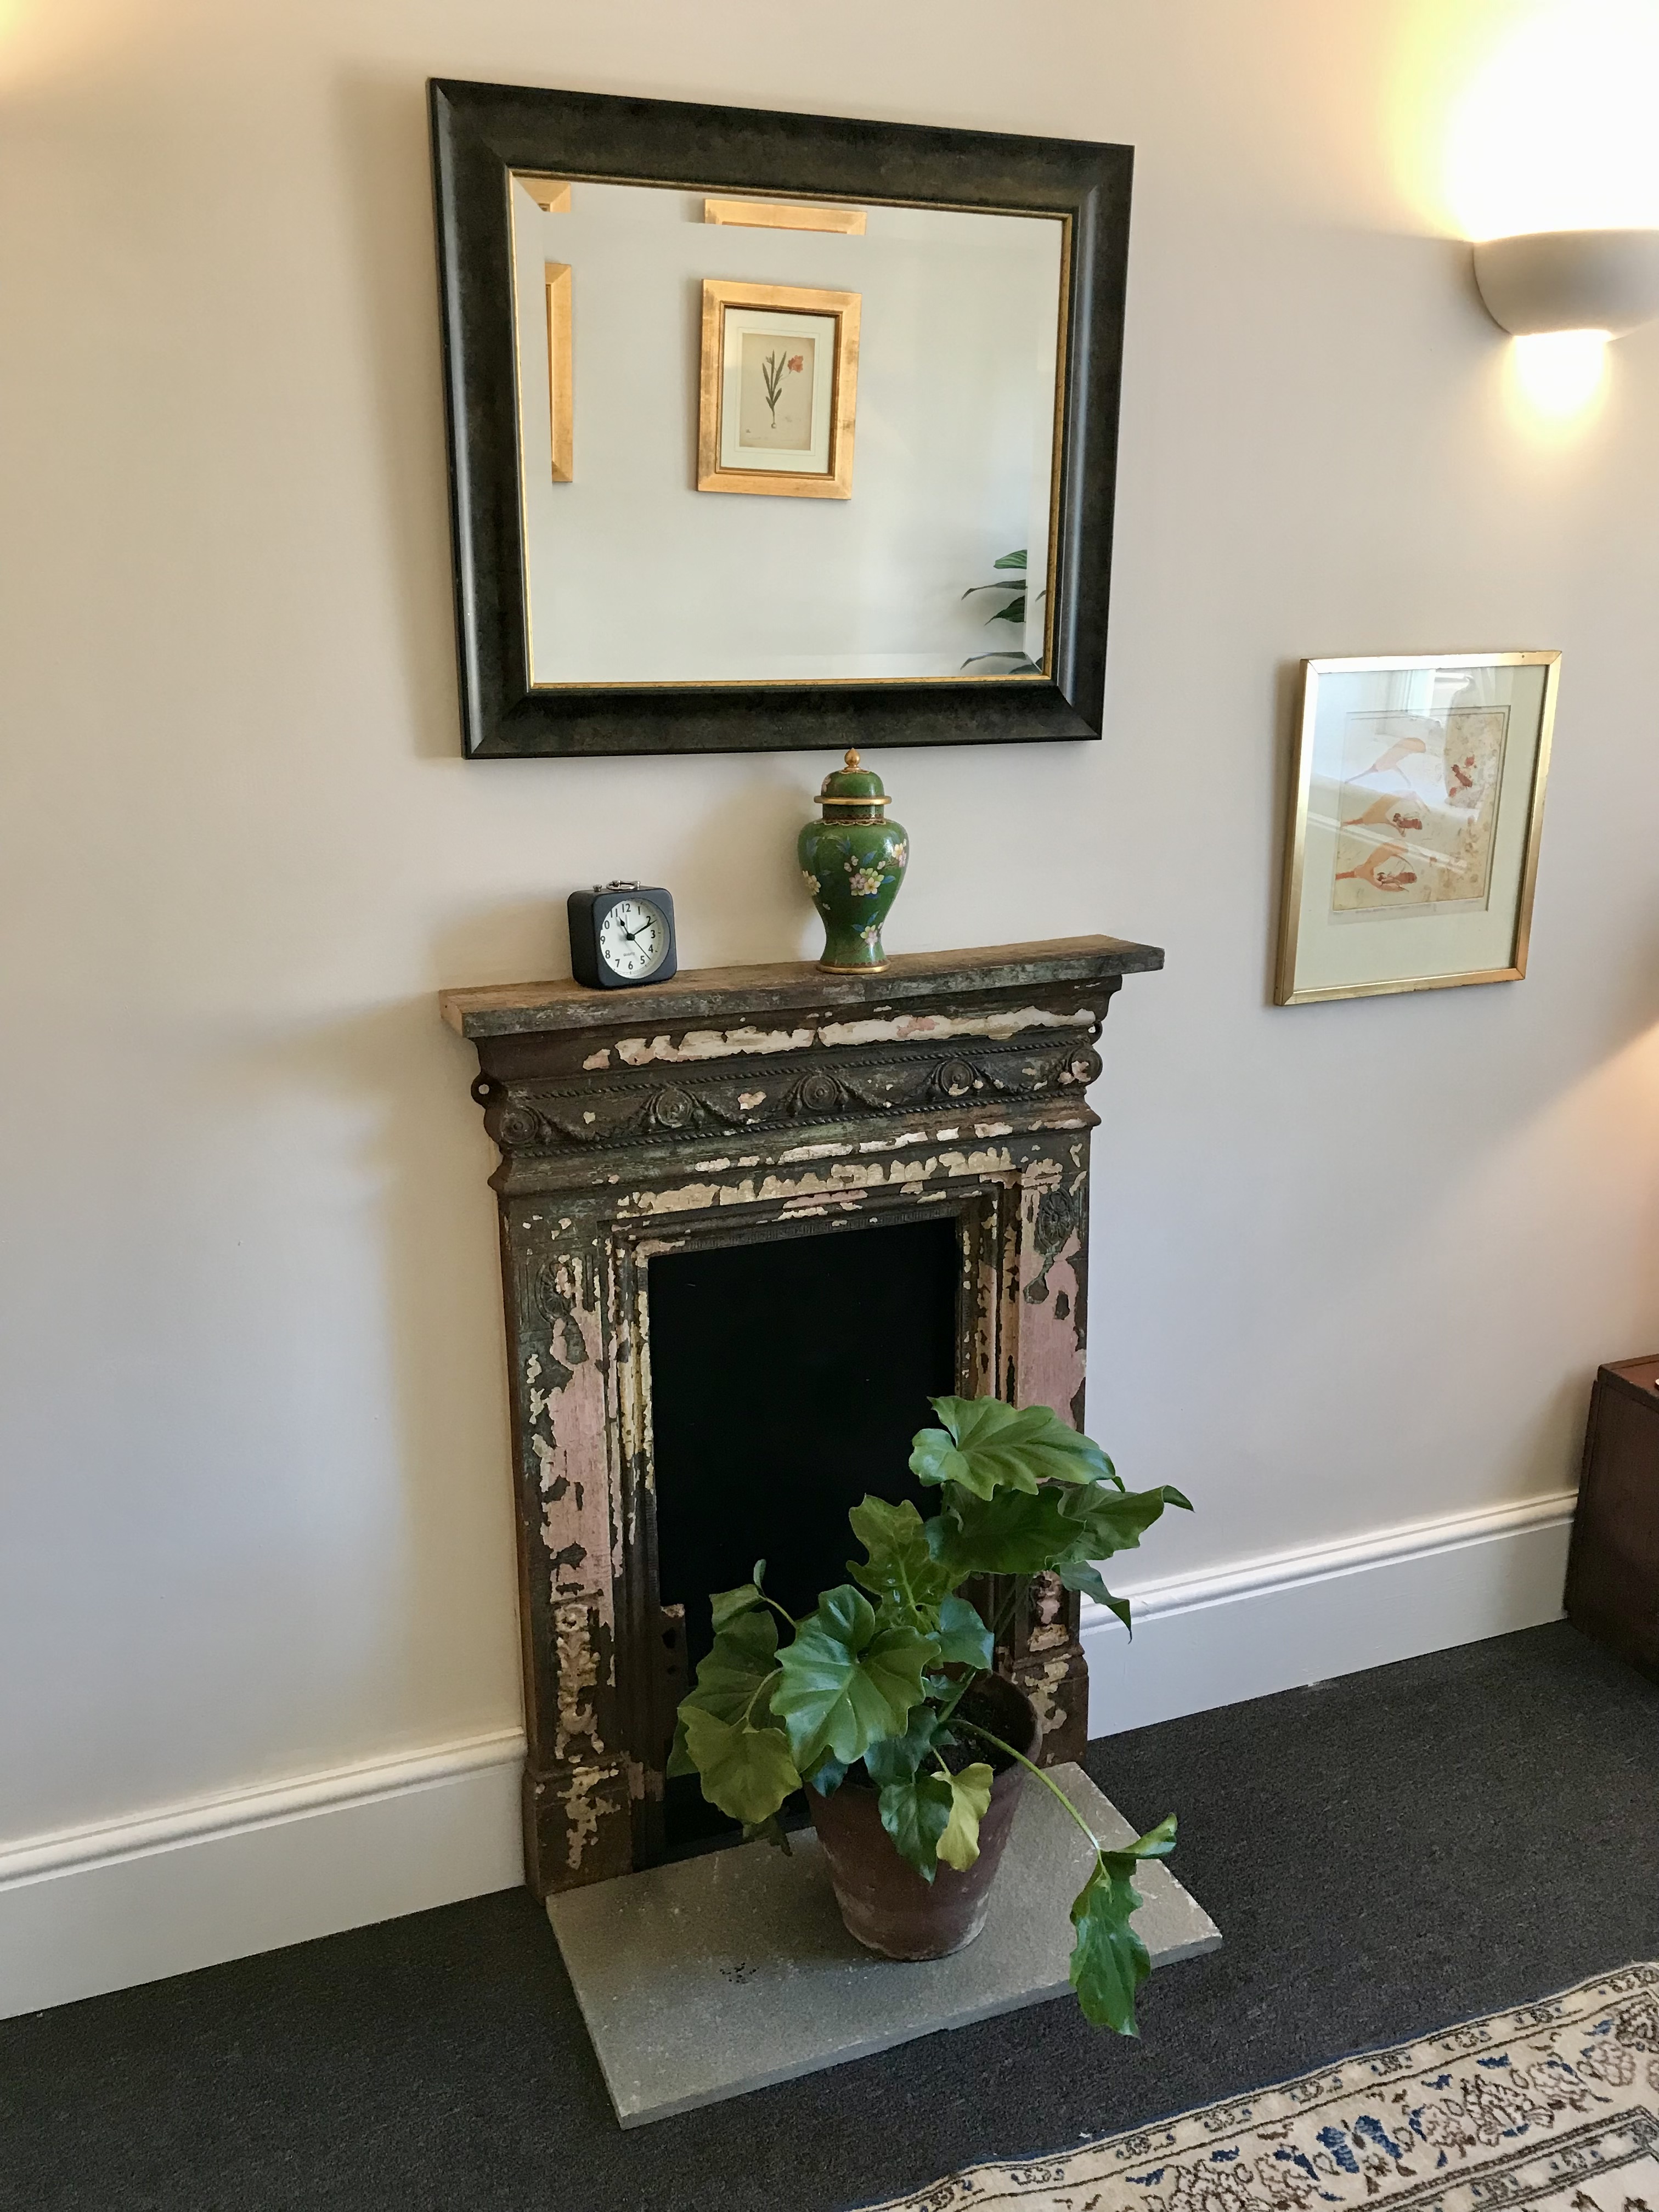 Fireplace, mirror and plant